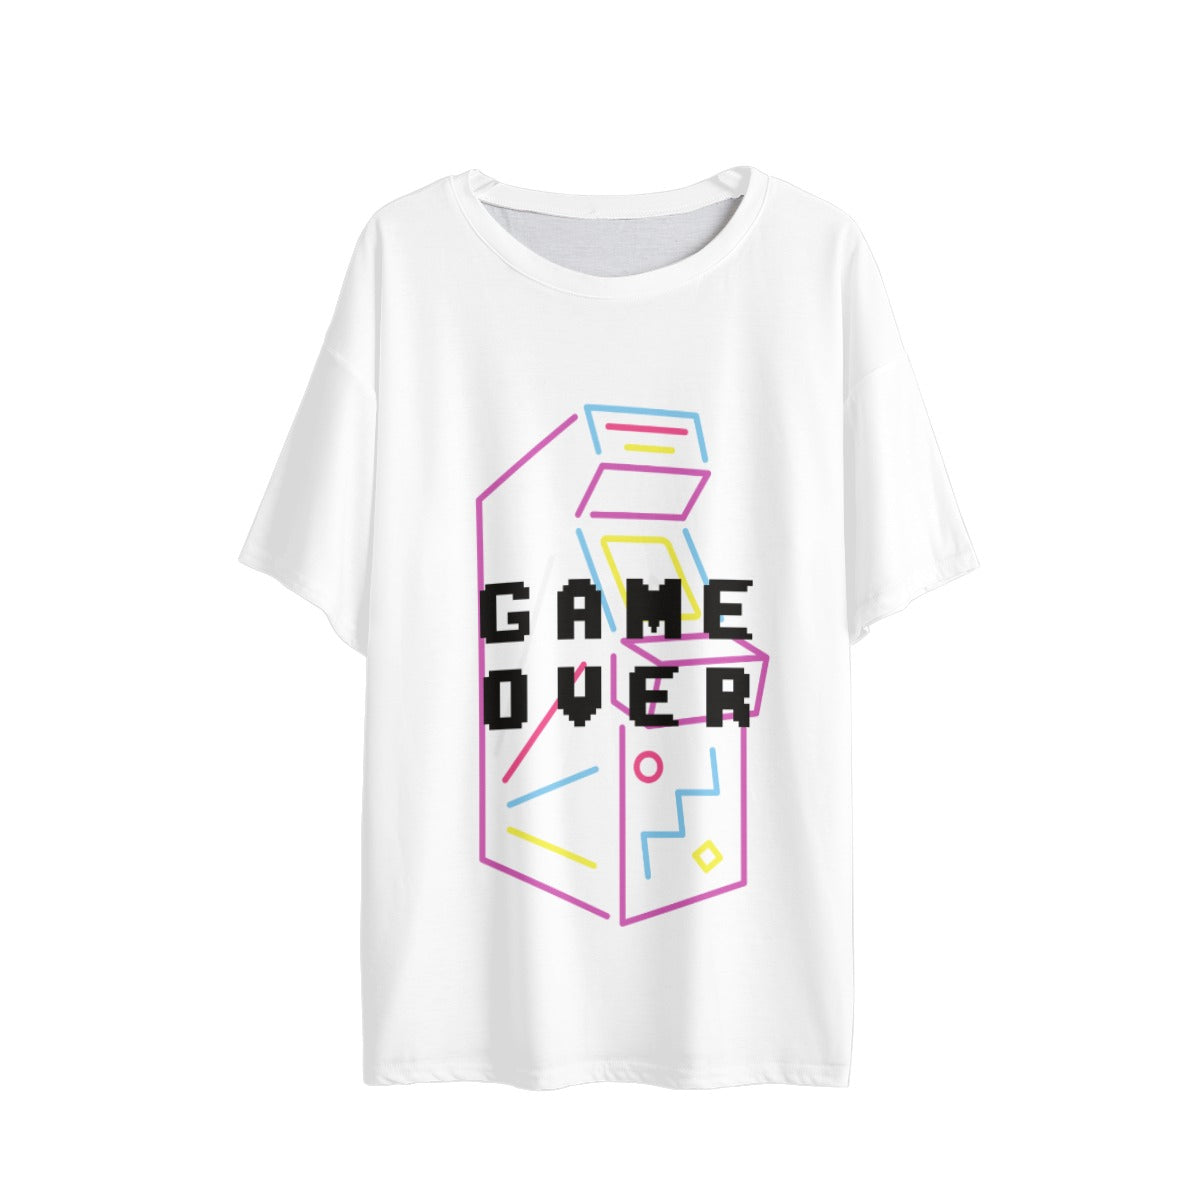 "GAME OVER" Tee